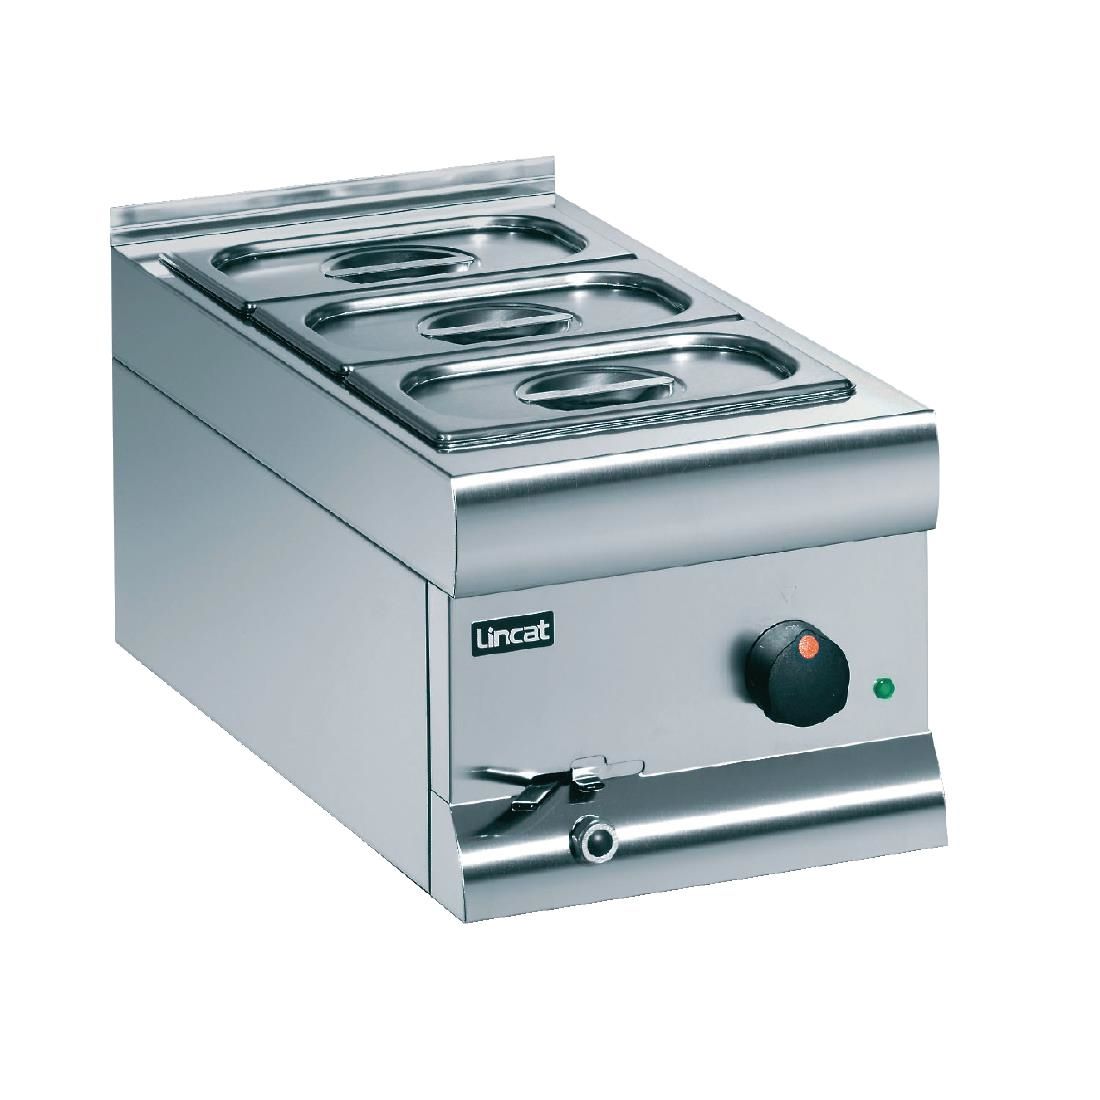 BM3AW - Lincat Silverlink 600 Electric Counter-top Bain Marie - Wet Heat - Gastronorms - Base + Dish Pack - W 300 mm - 1.0 kW JD Catering Equipment Solutions Ltd